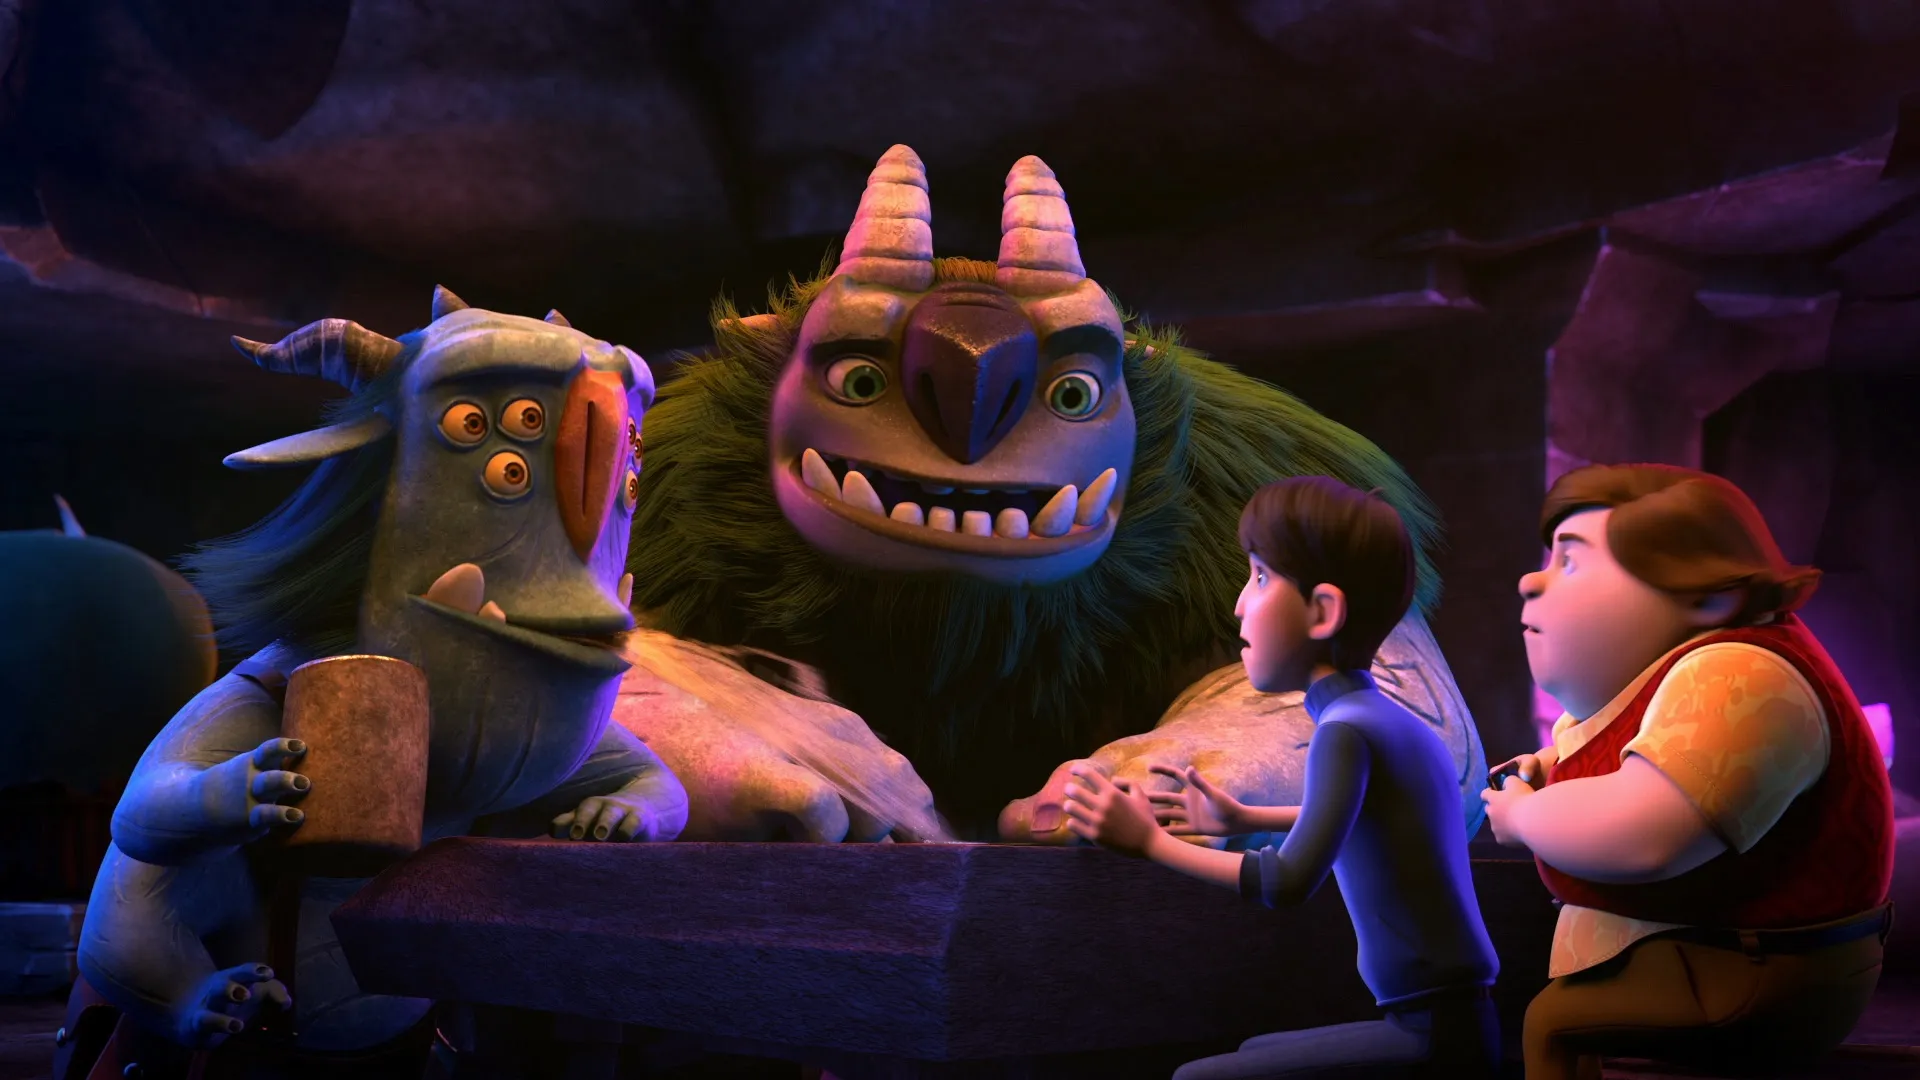 From the mind of Guillermo del Toro comes this epic animated series about a teenage boy who discovers a hidden world of trolls beneath his hometown. Filled with action, humor, and heart, it's a thrilling adventure for the whole family.]]>